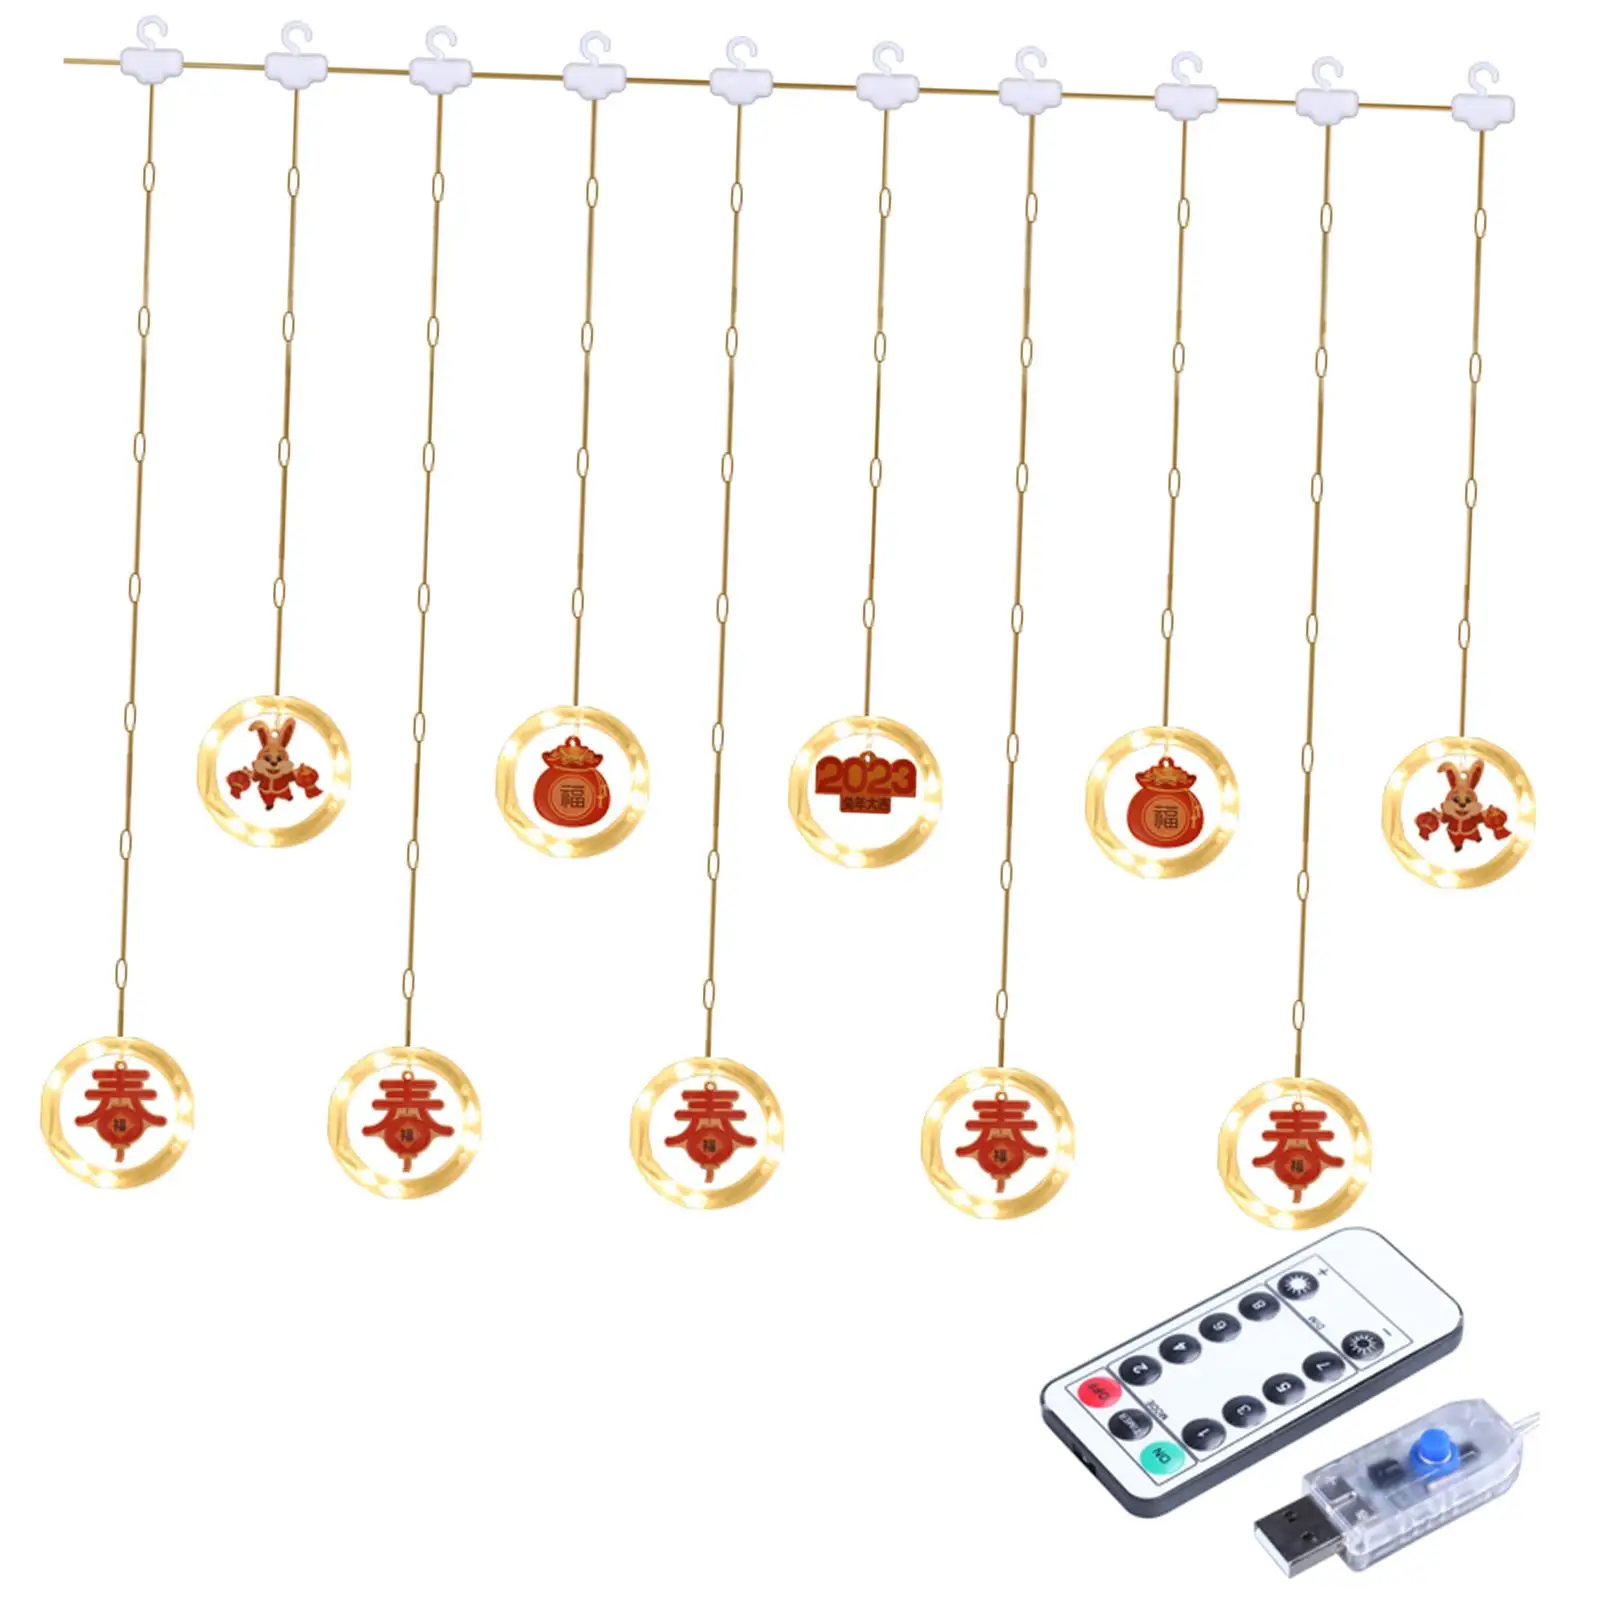 LED Chinese String Light Lamp Hanging Warm White Lighting Remote Control Light for Yard Porch Bar Indoor Decor